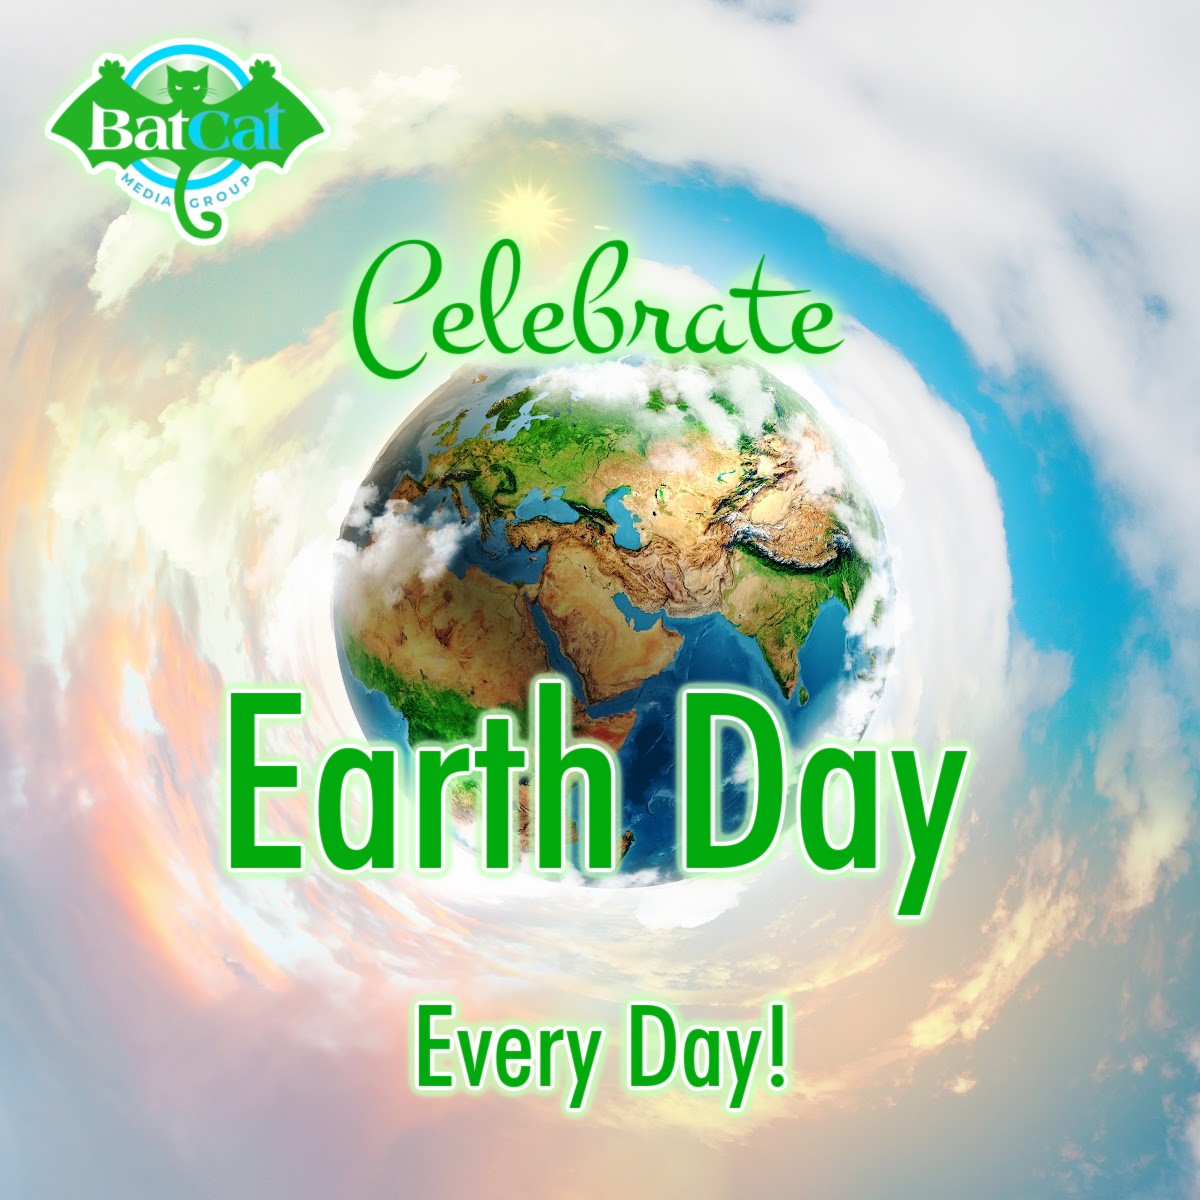 We should care about Earth every day, as much as we do on Earth Day! This year's theme is 'Planet v. Plastics' 🌍 🧴 Share with us what steps you are taking this year to make your business 'greener!' 💚 #BatCatMediaGroup #EarthDay